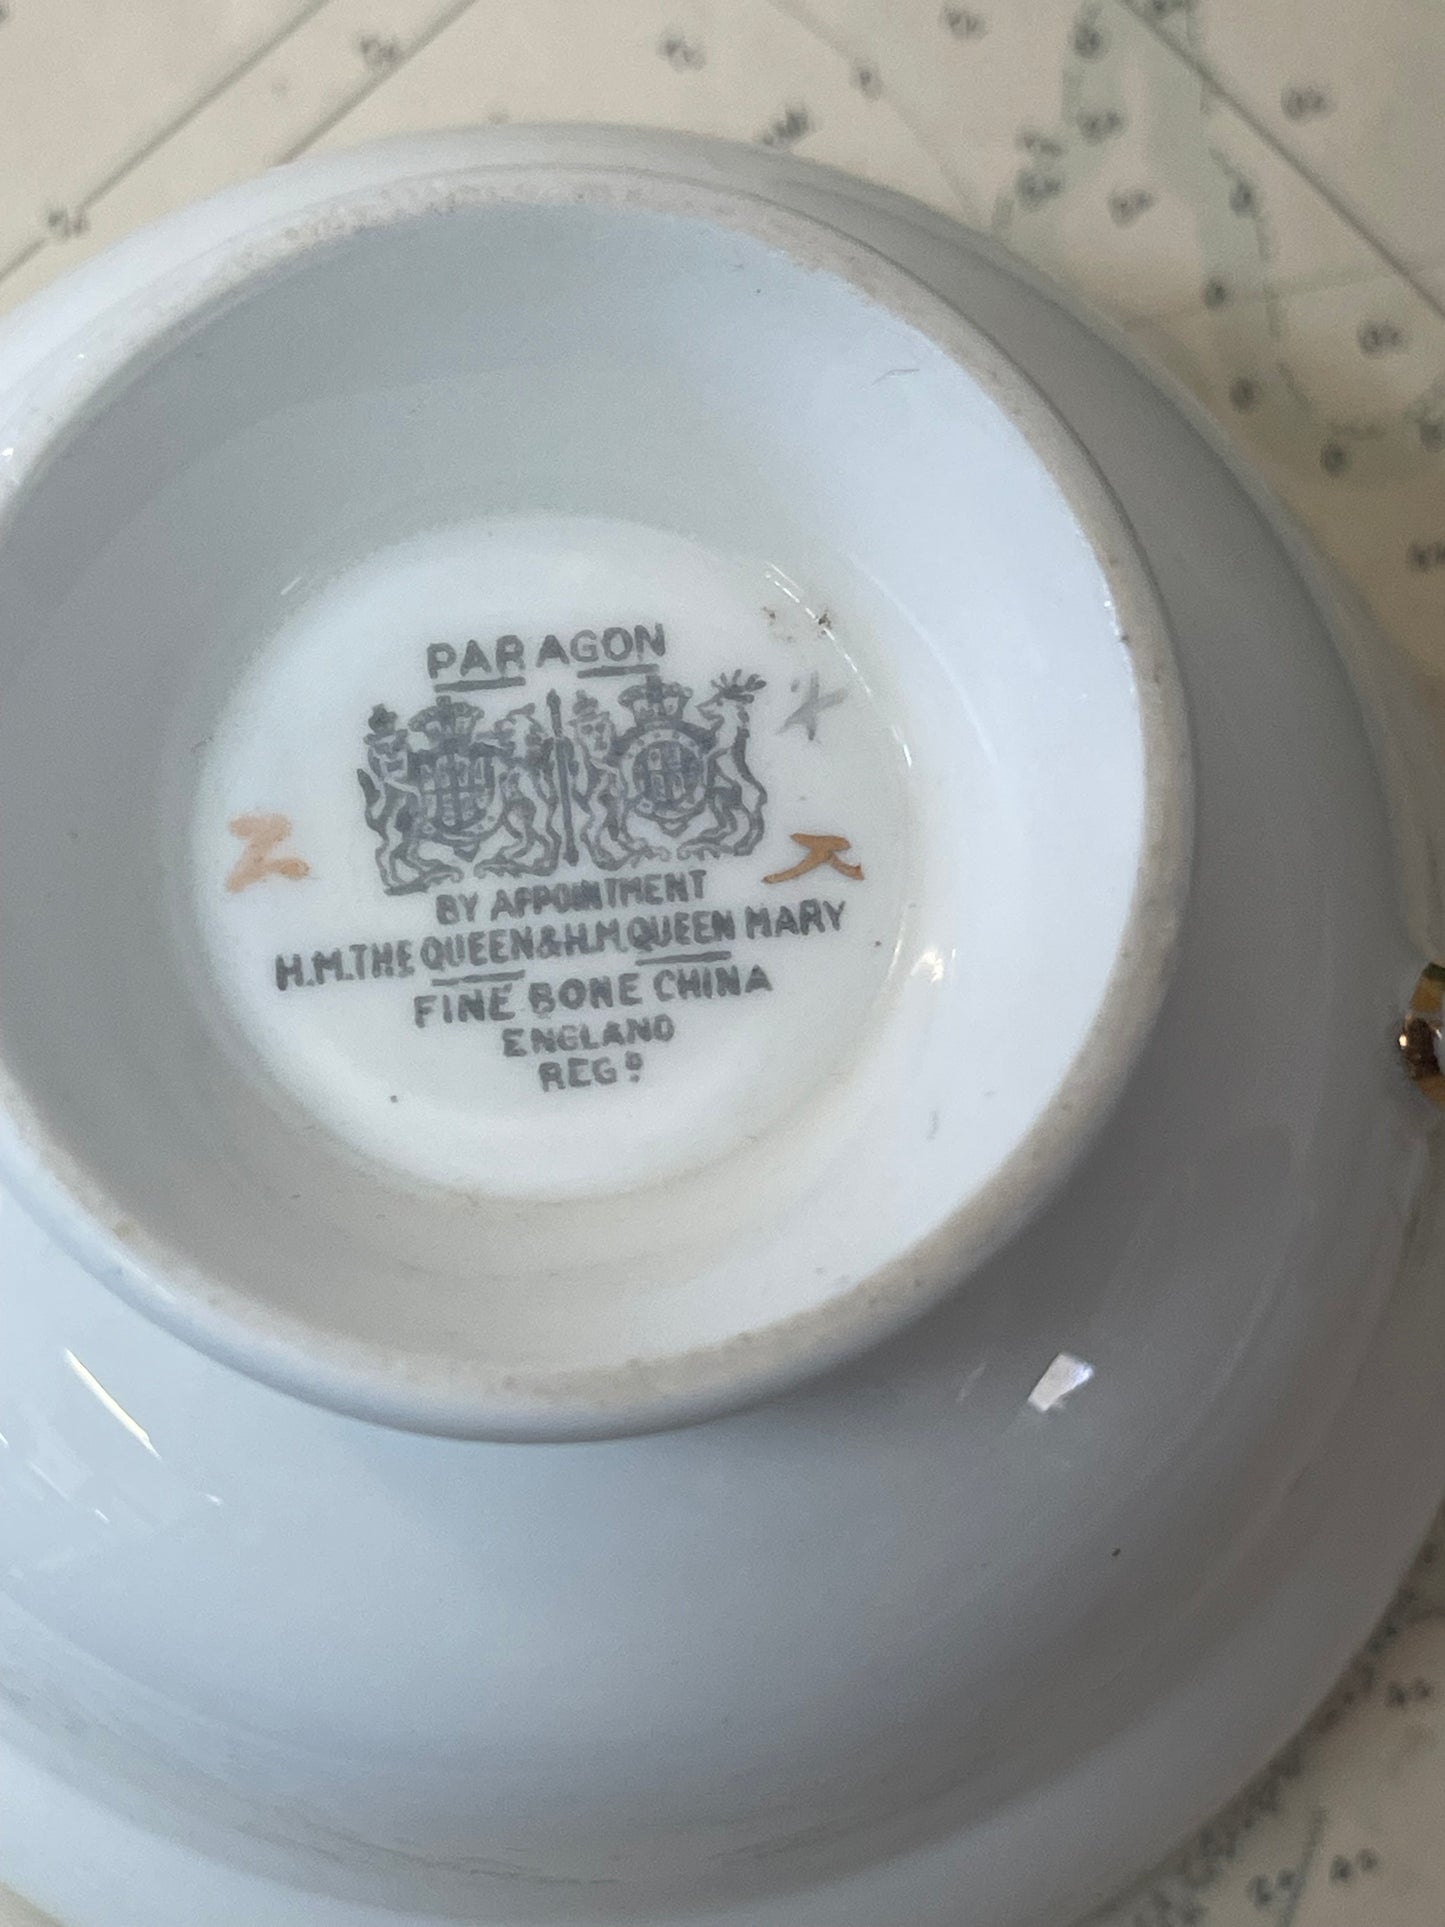 Paragon China by appointment to her majesty Queen Mary